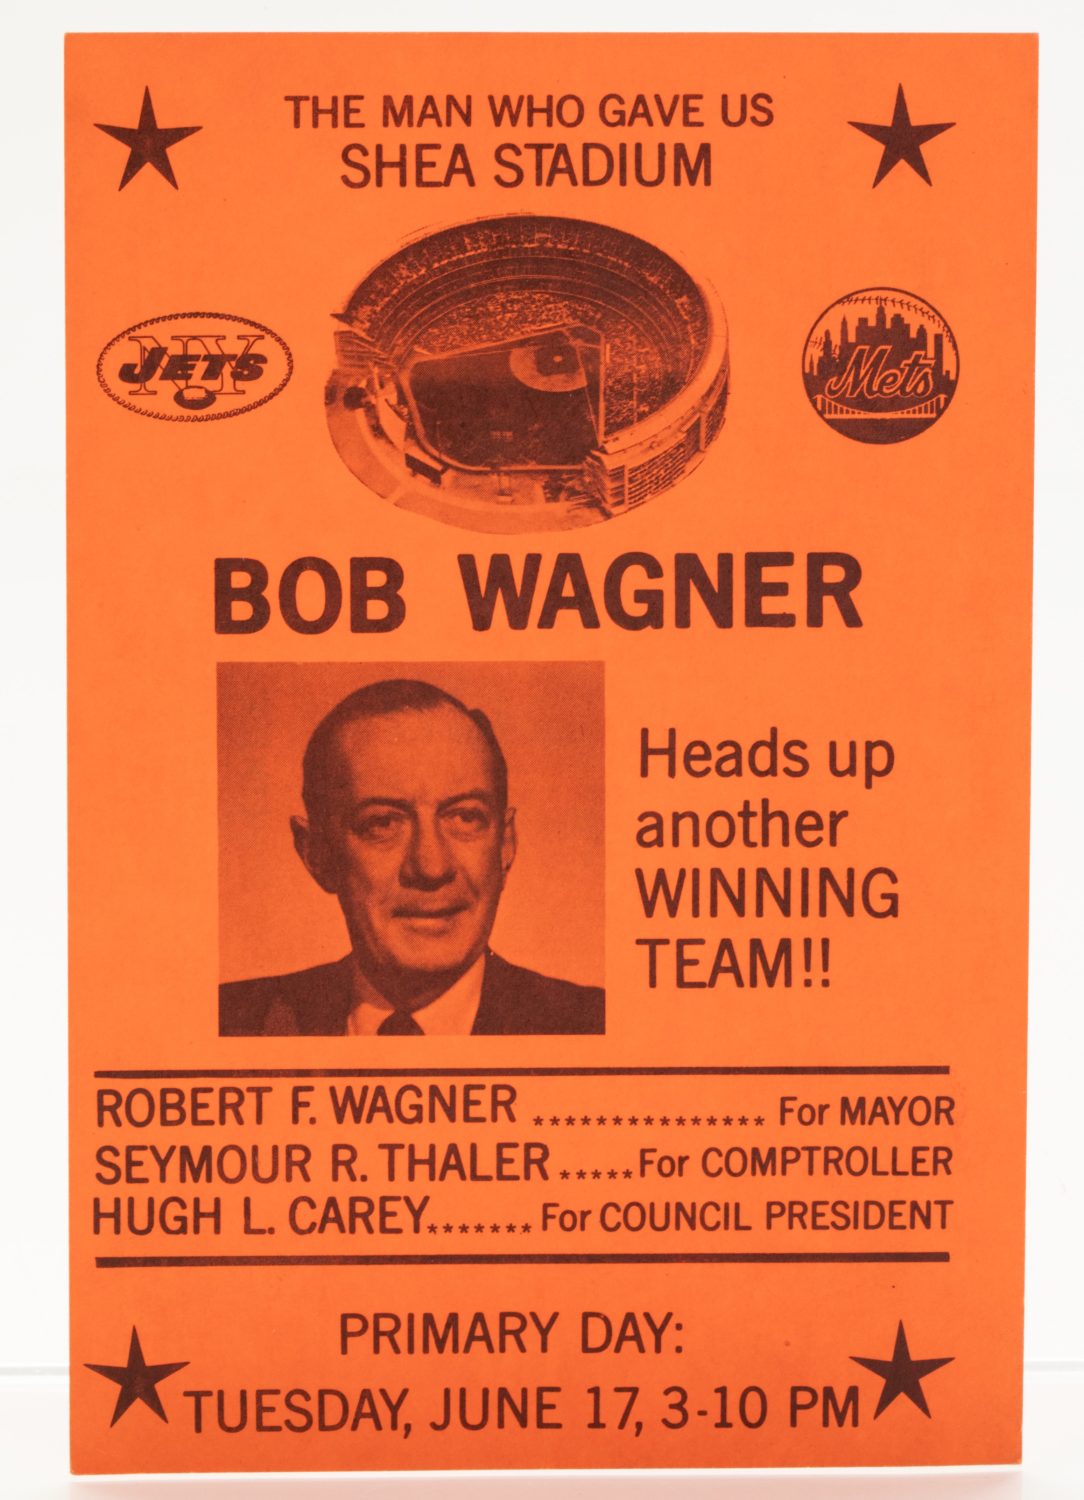 1969 Mets/Jets Schedule Featuring Robert Wagner - Front with Wagner Photo